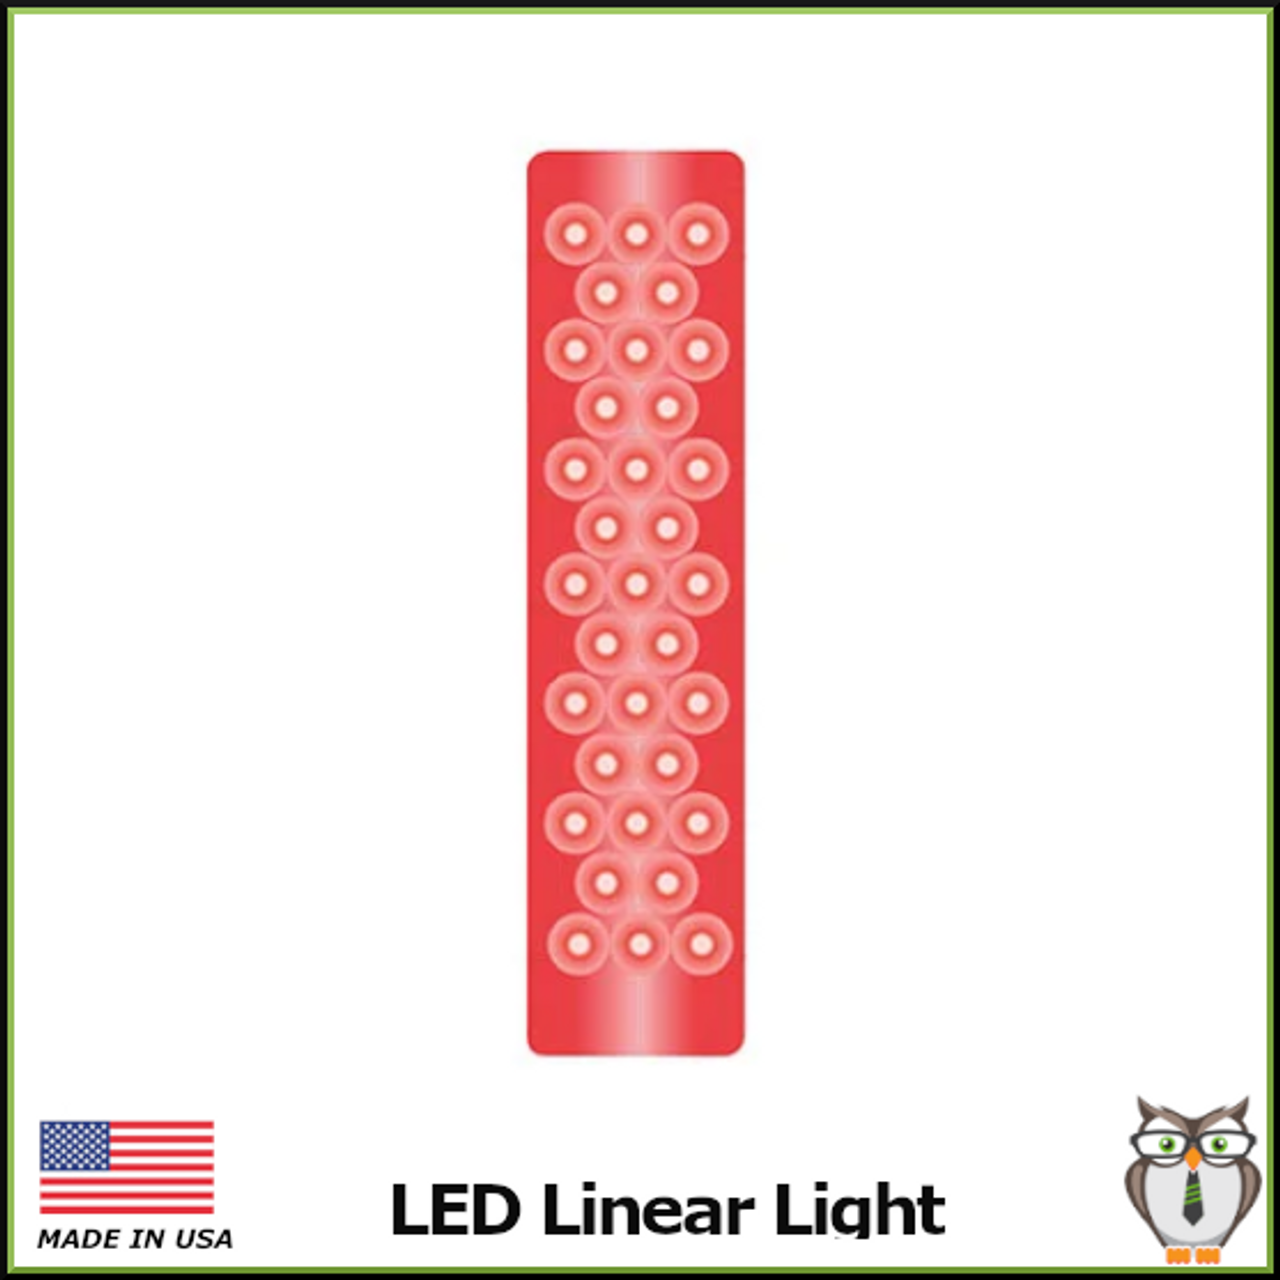 LED Linear Light - Red "Stop"